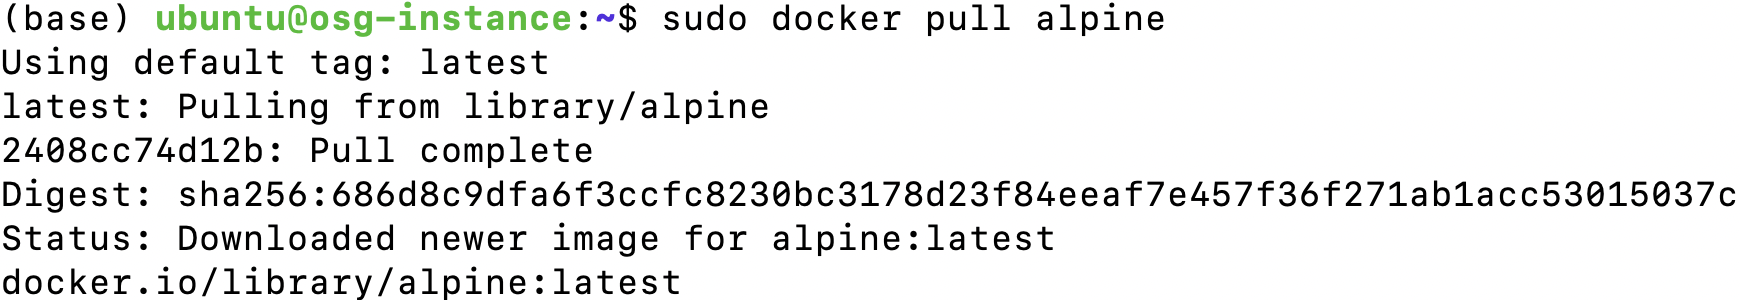 Containers docker pull alpine.